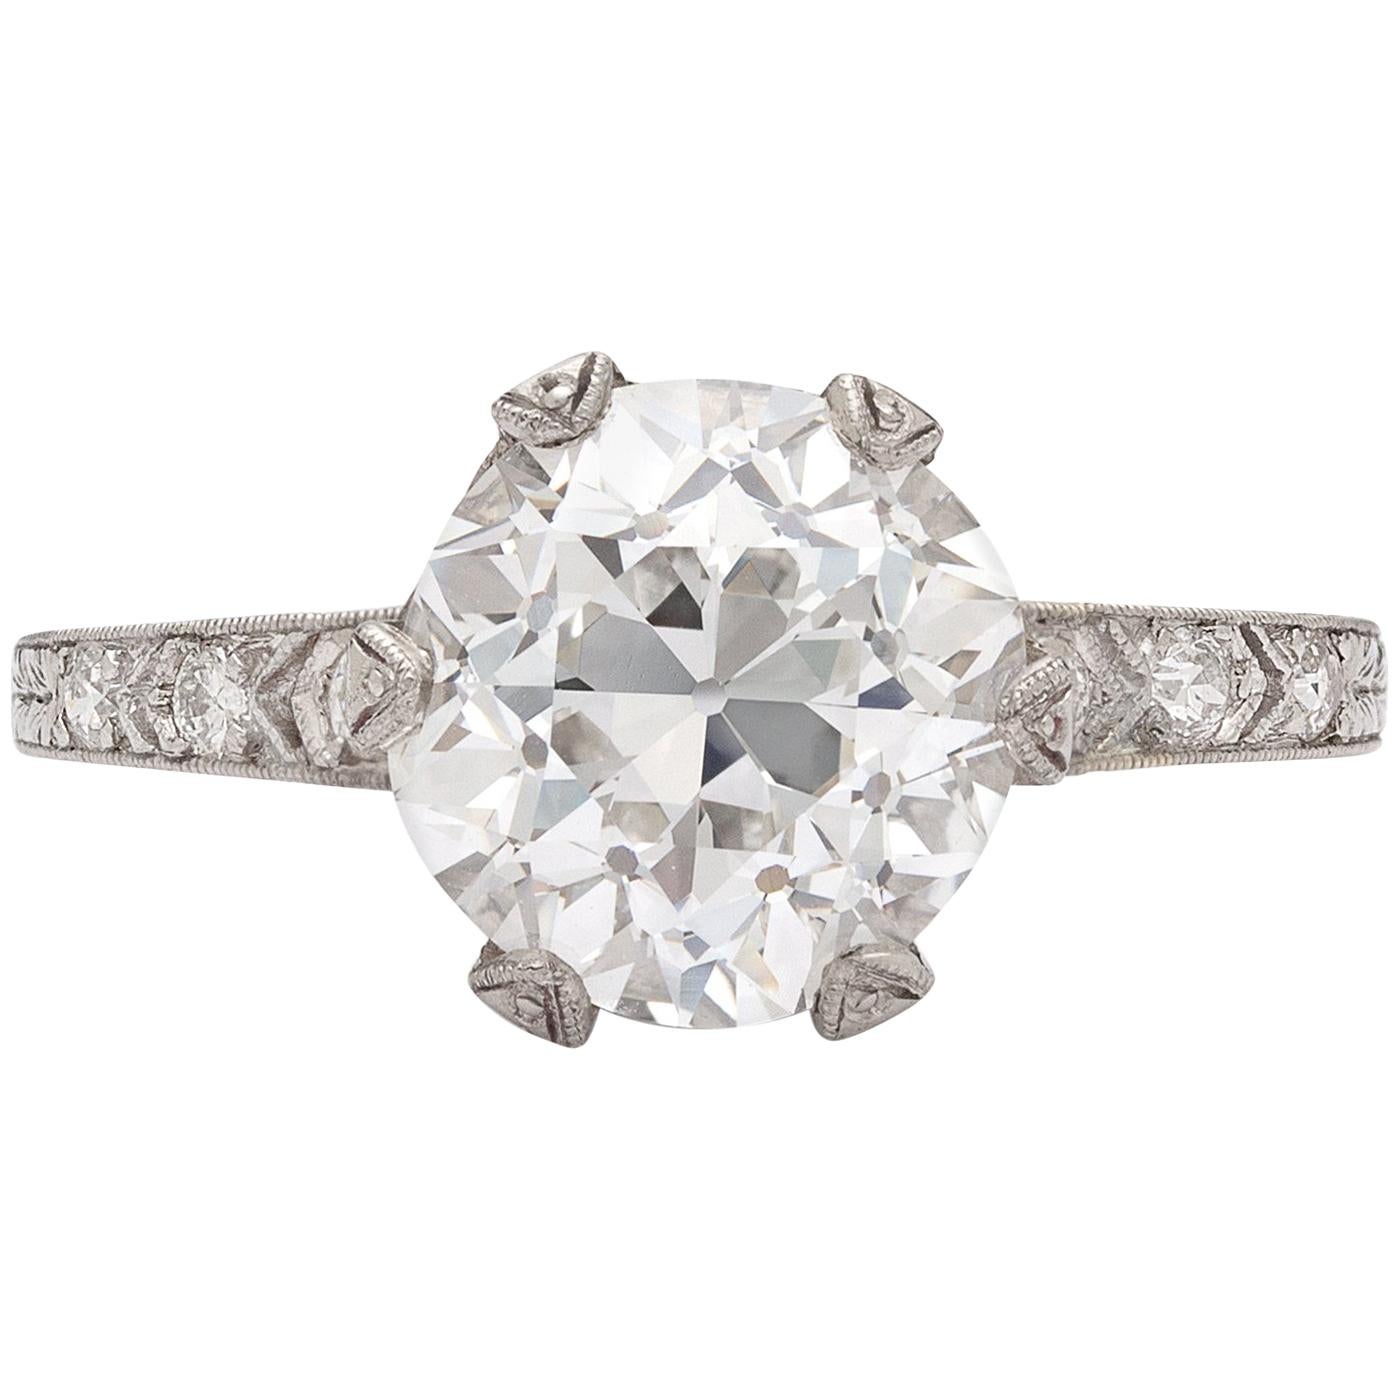 Stunning GIA 3.12 Carat Antique Diamond Ring by Tiffany & Co.